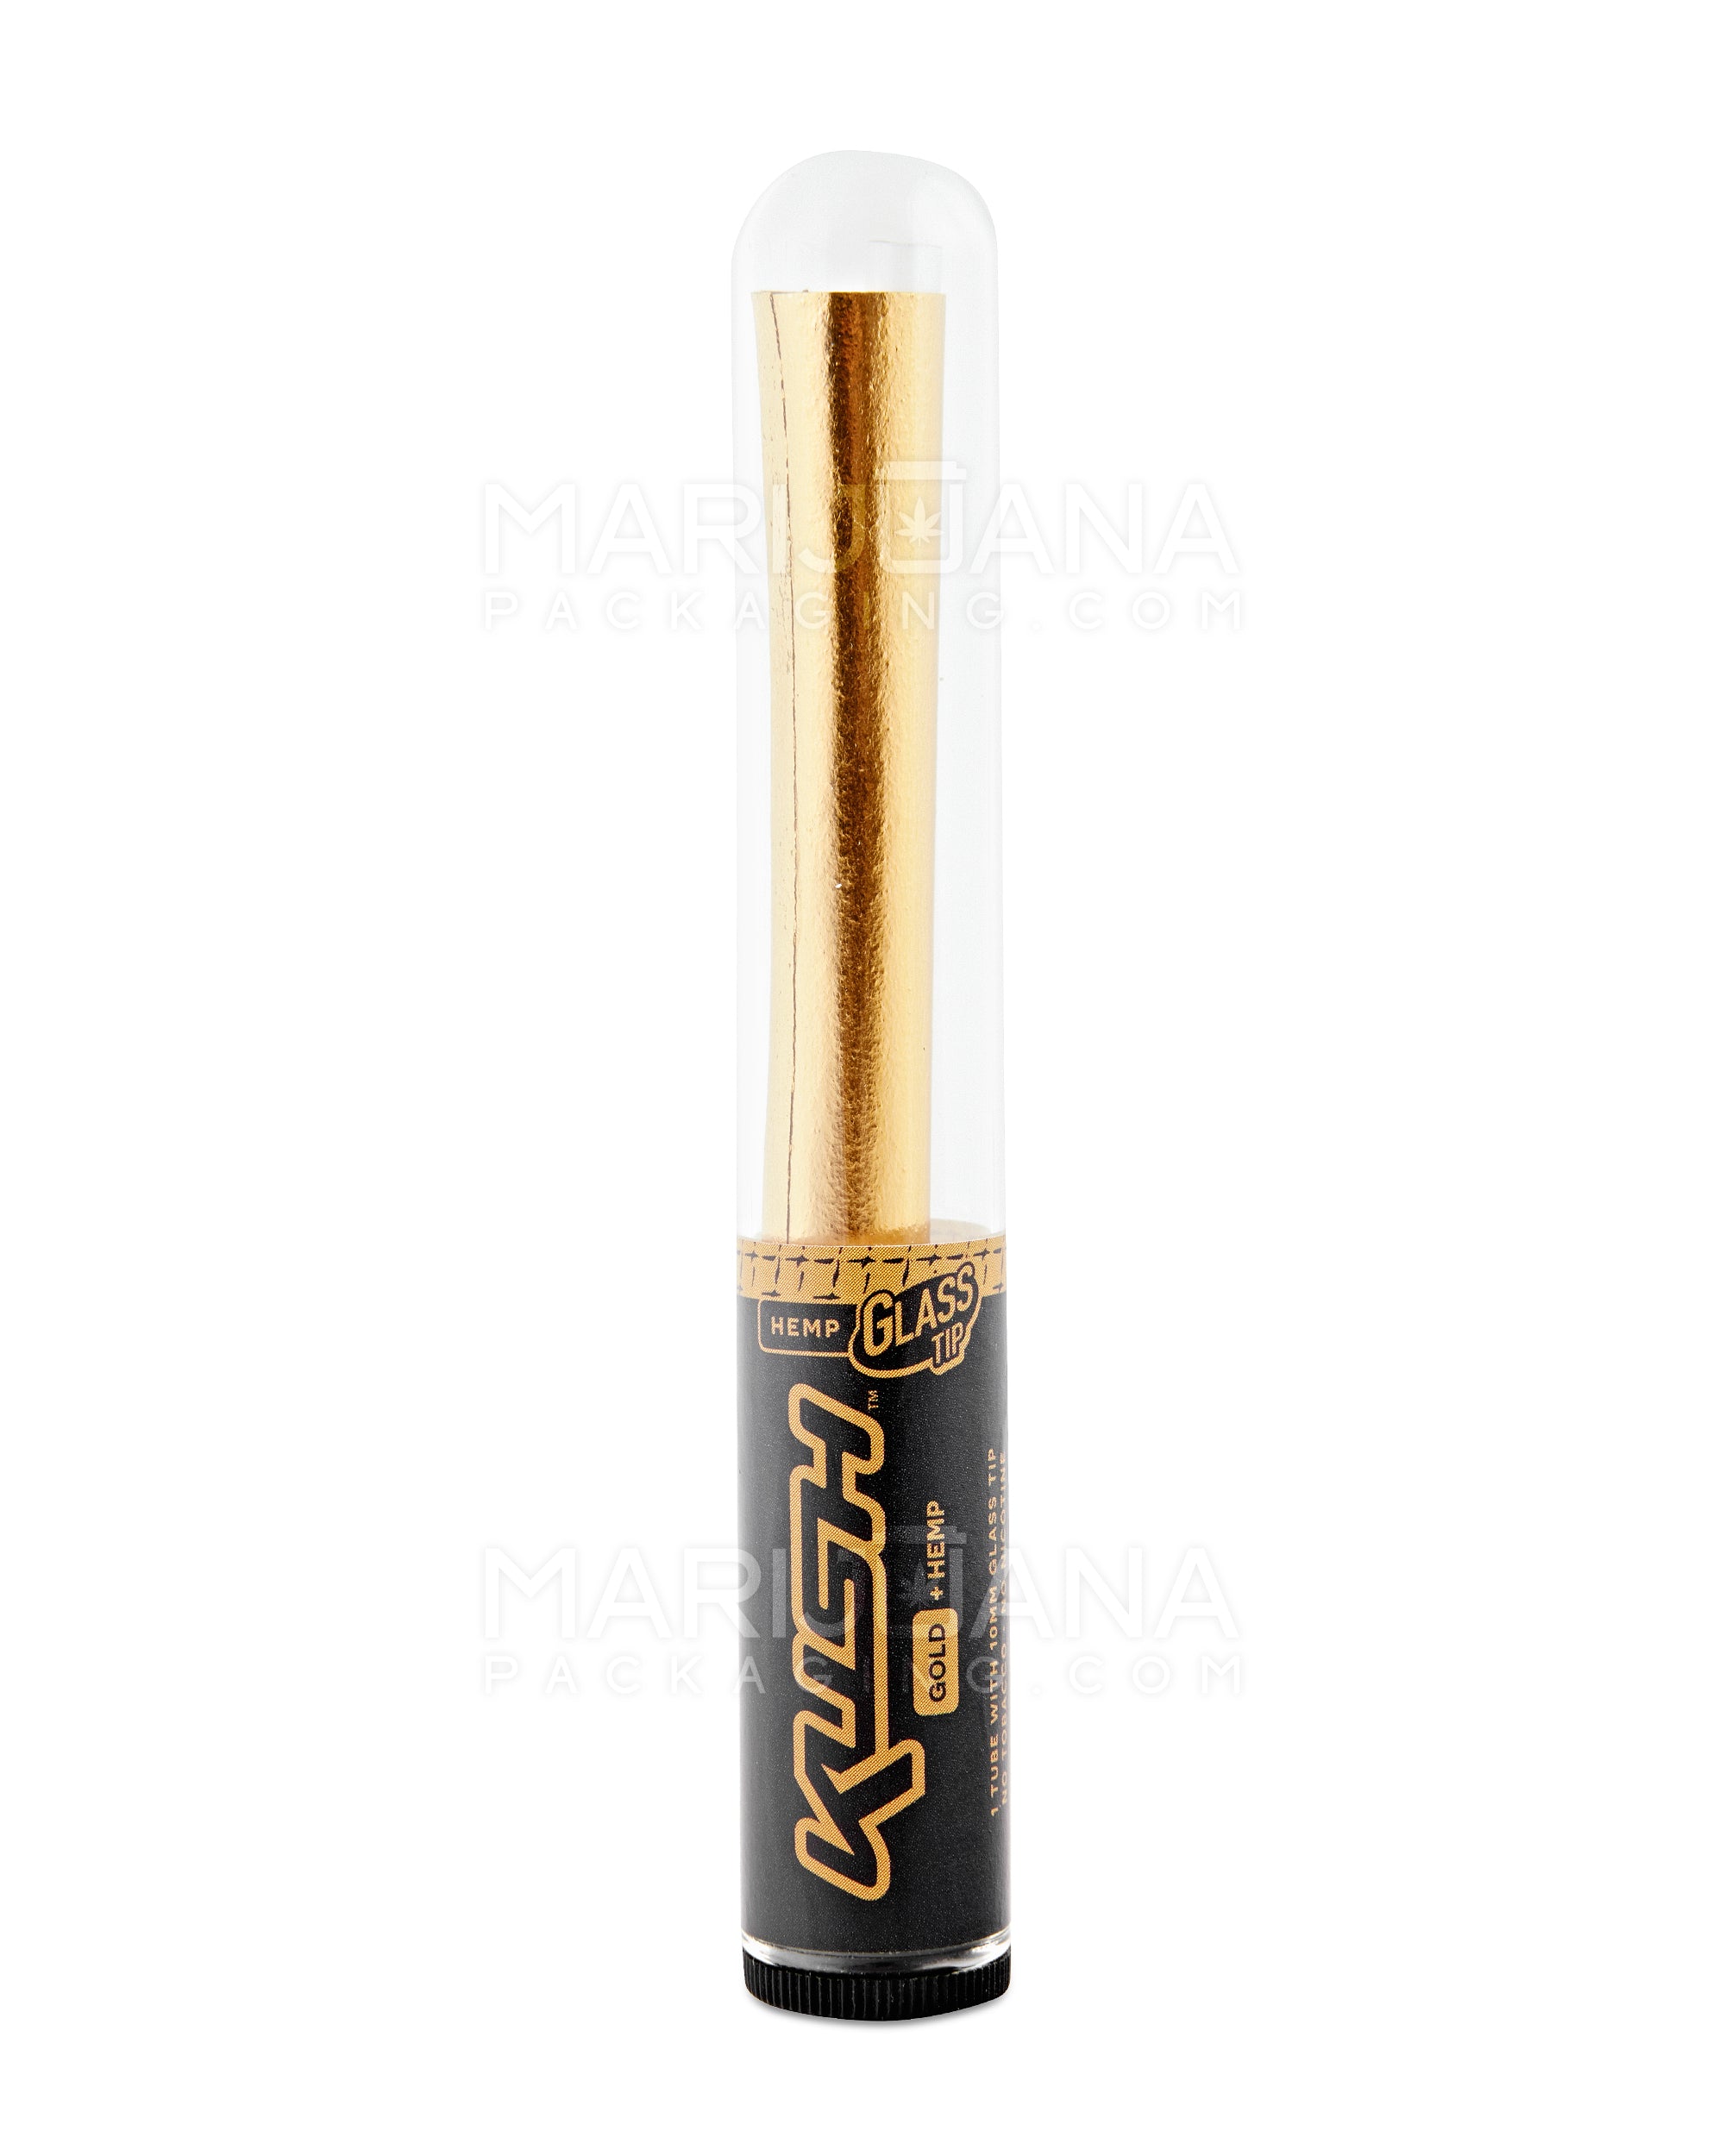 KUSH | 'Retail Display' 24K Gold King Size Hemp Pre Rolled Cones w/ Glass Filter Tips | 109mm - Edible Gold - 8 Count